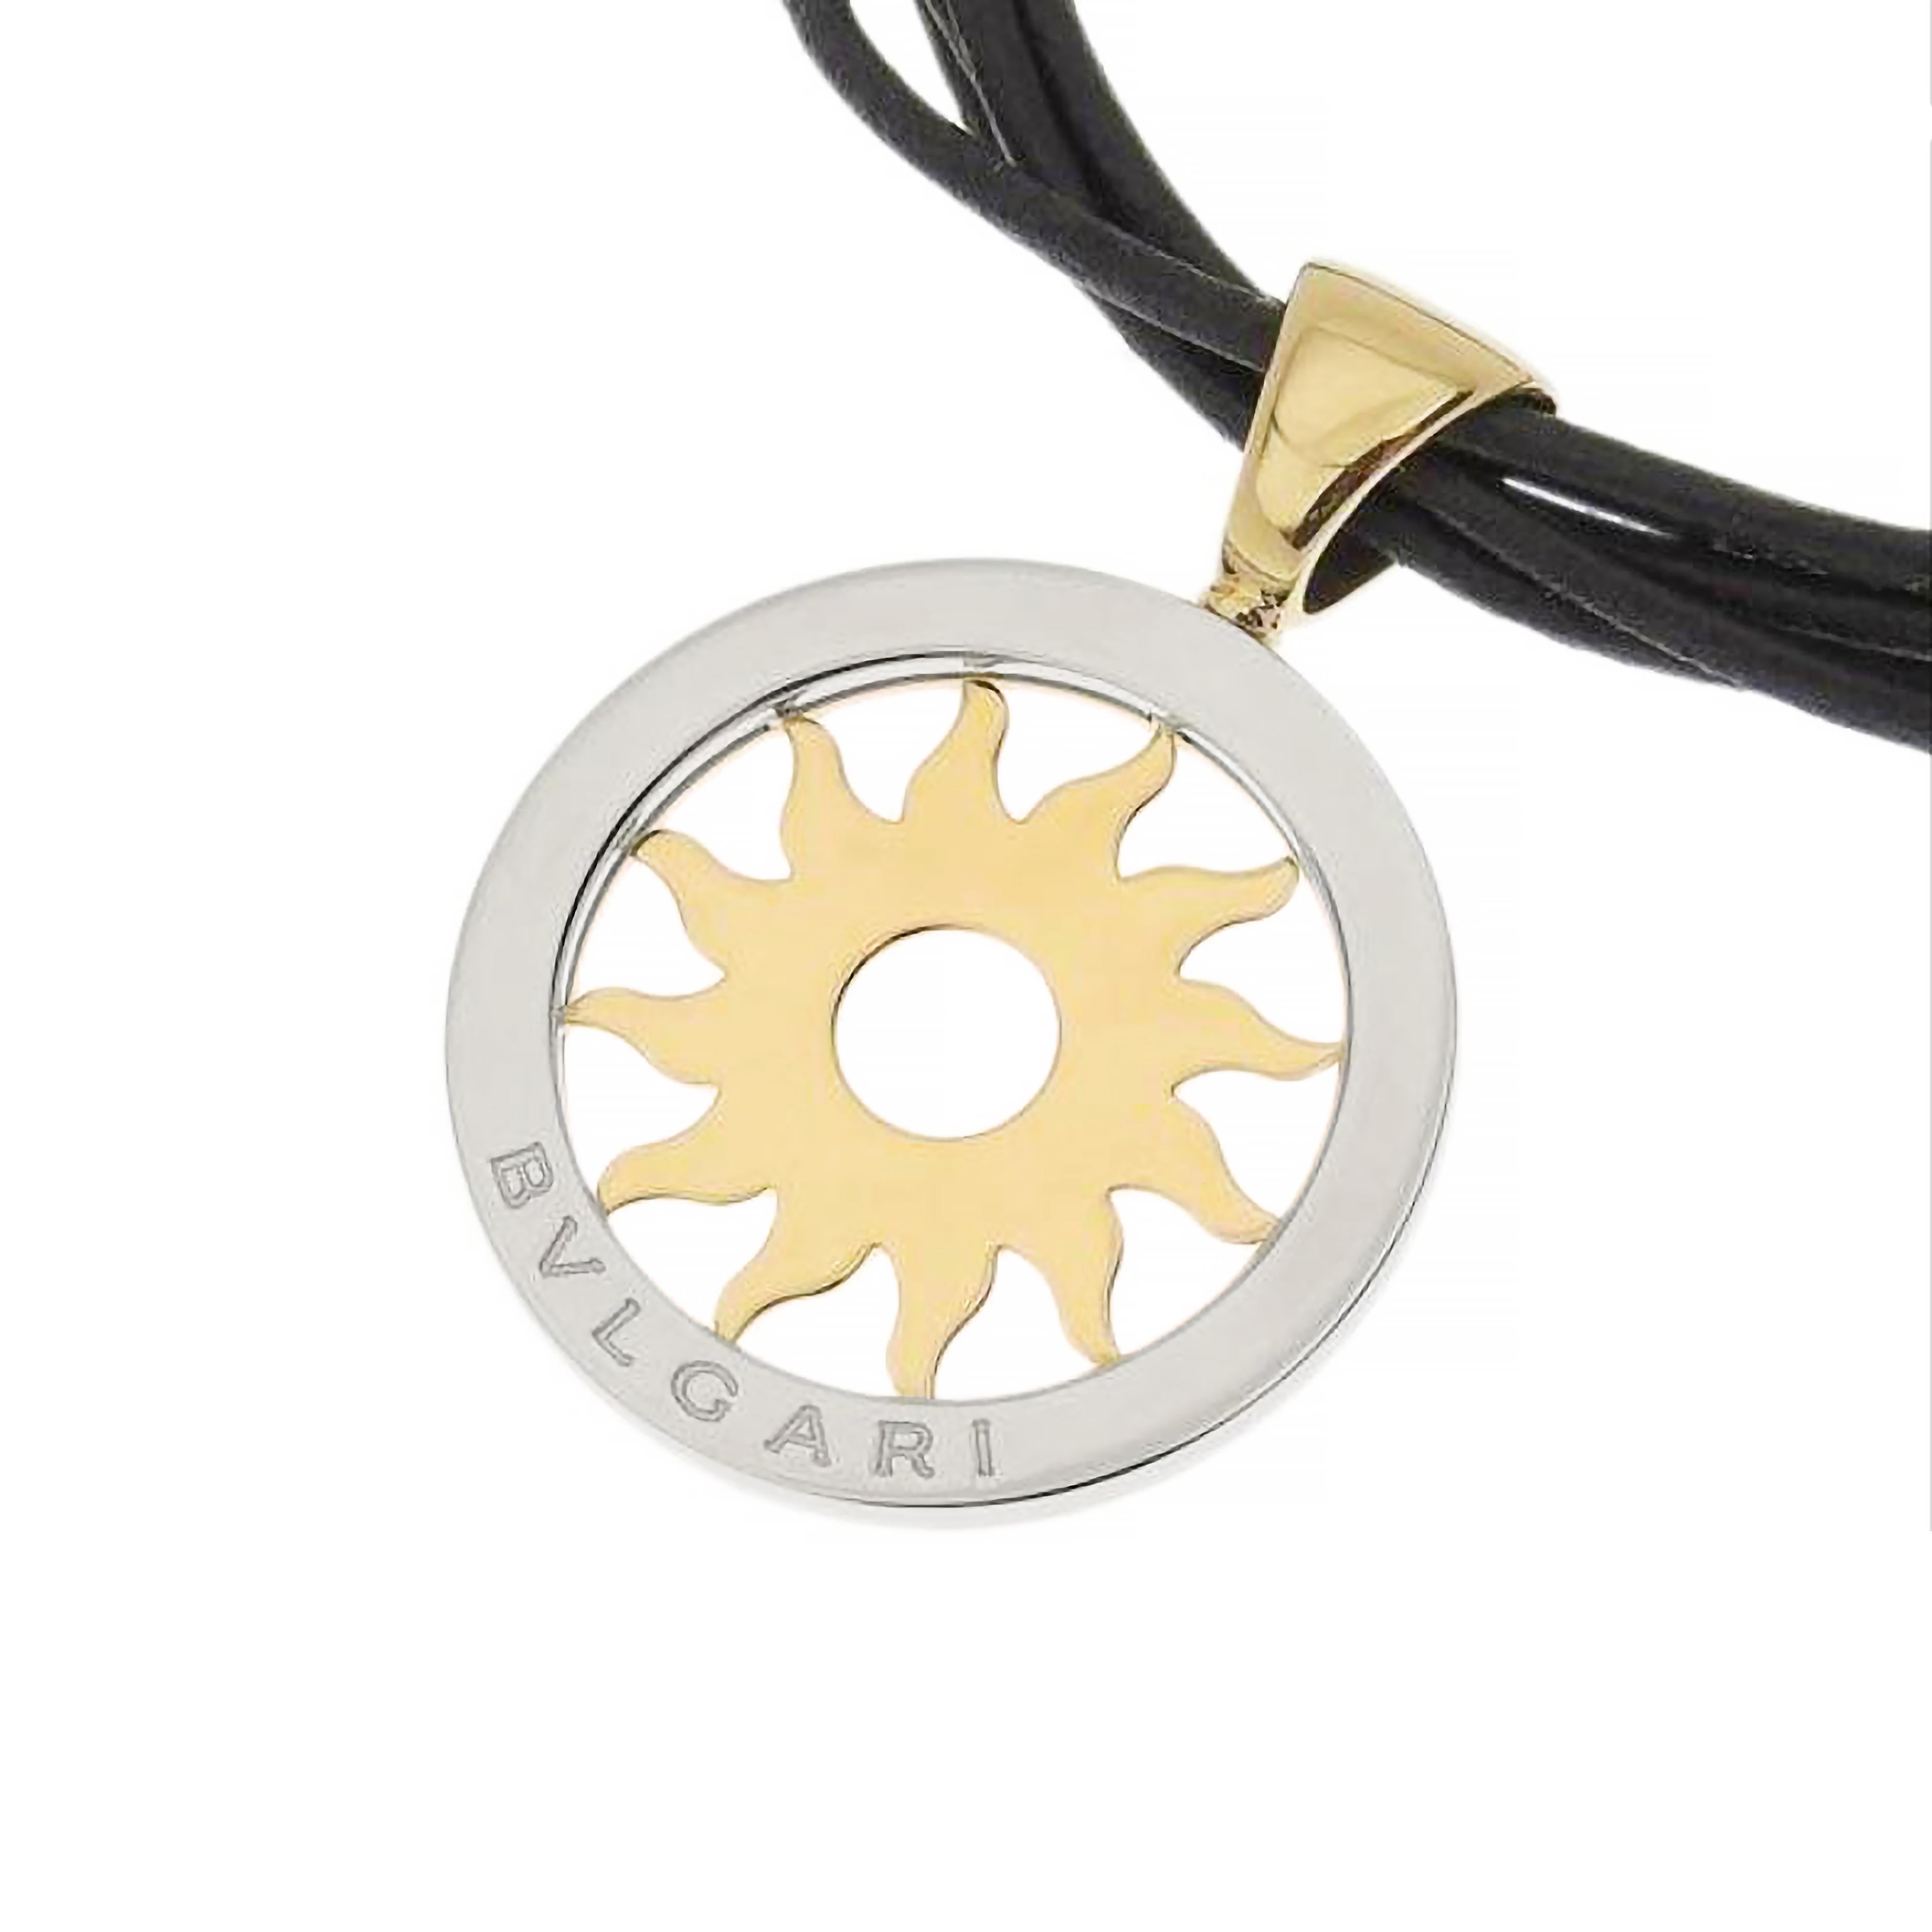 This iconic Bvlgari necklace is from their Tondo collection featuring a stainless steel and yellow gold Tondo sun pendant stamped with the famous BVLGARI signature. This bold pendant comes with a multi strand leather necklace finished with a